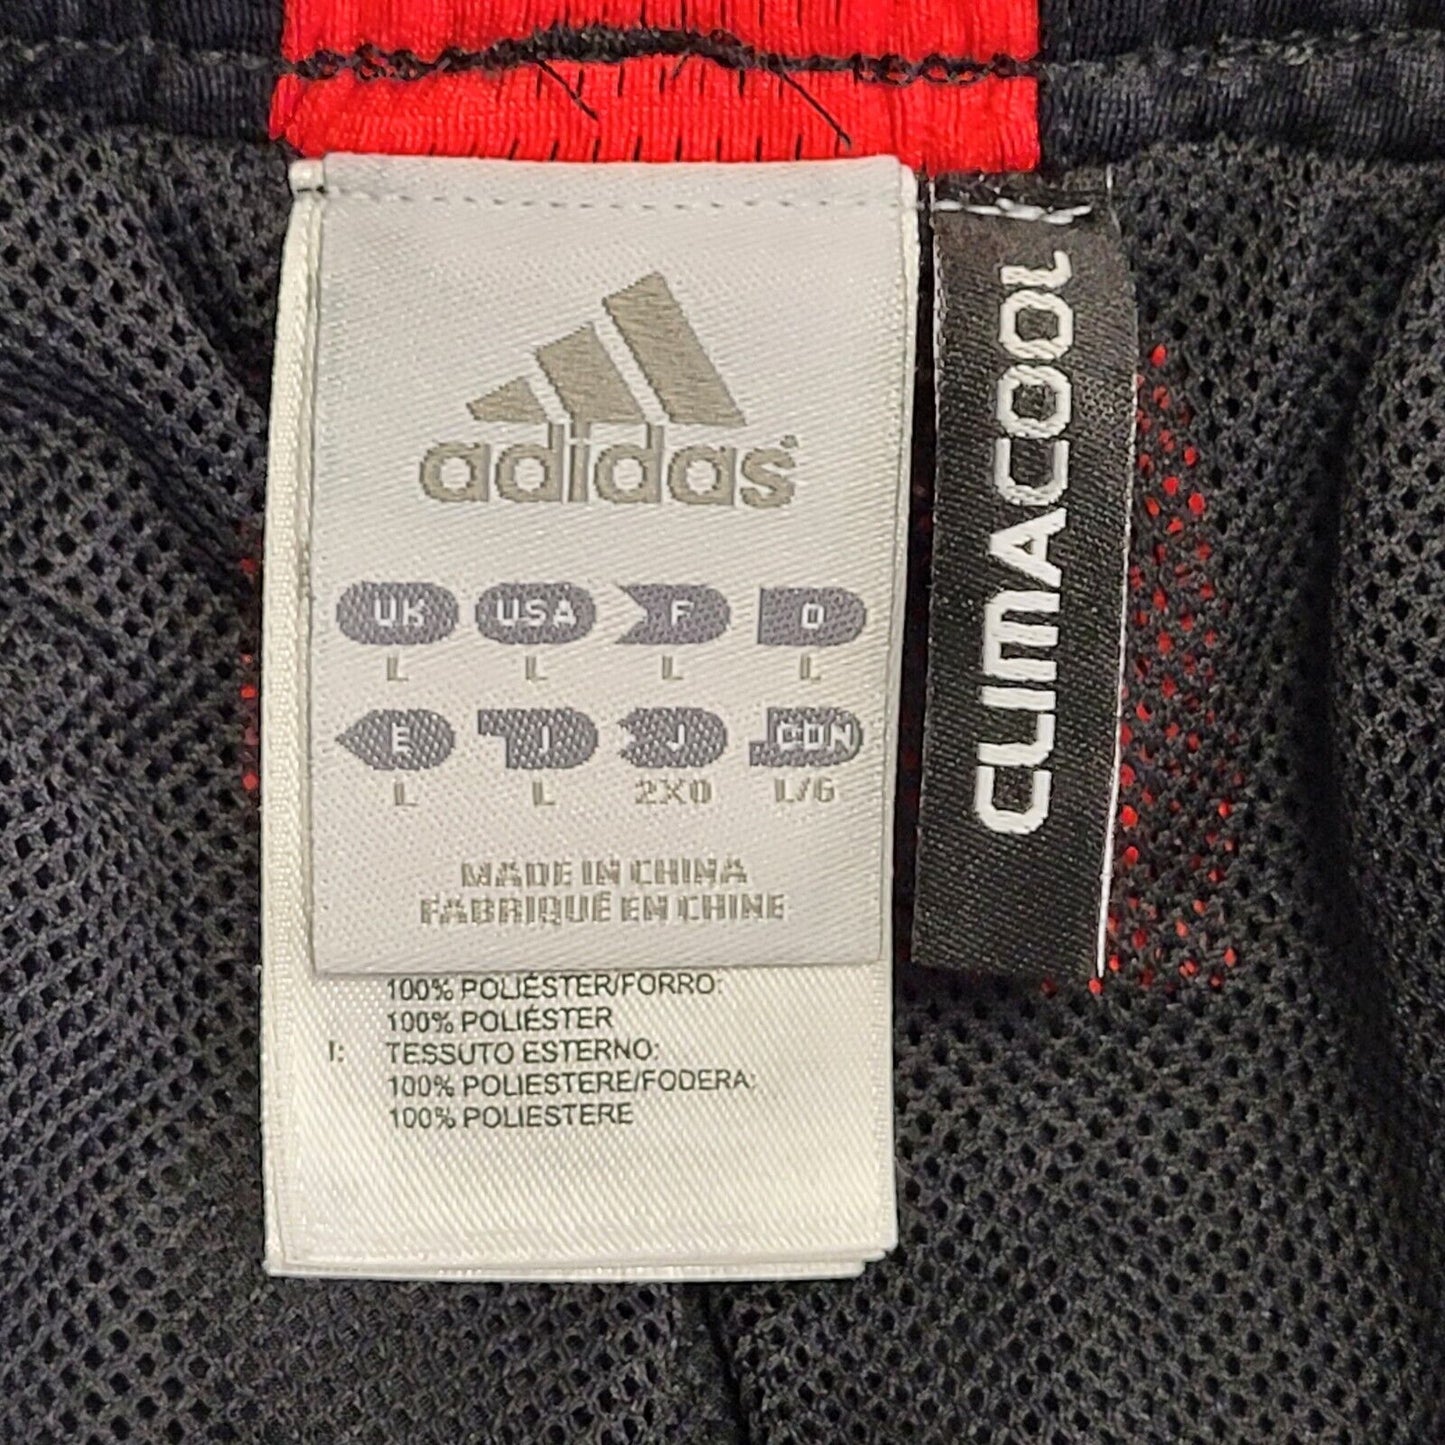 Adidas Trousers (L)